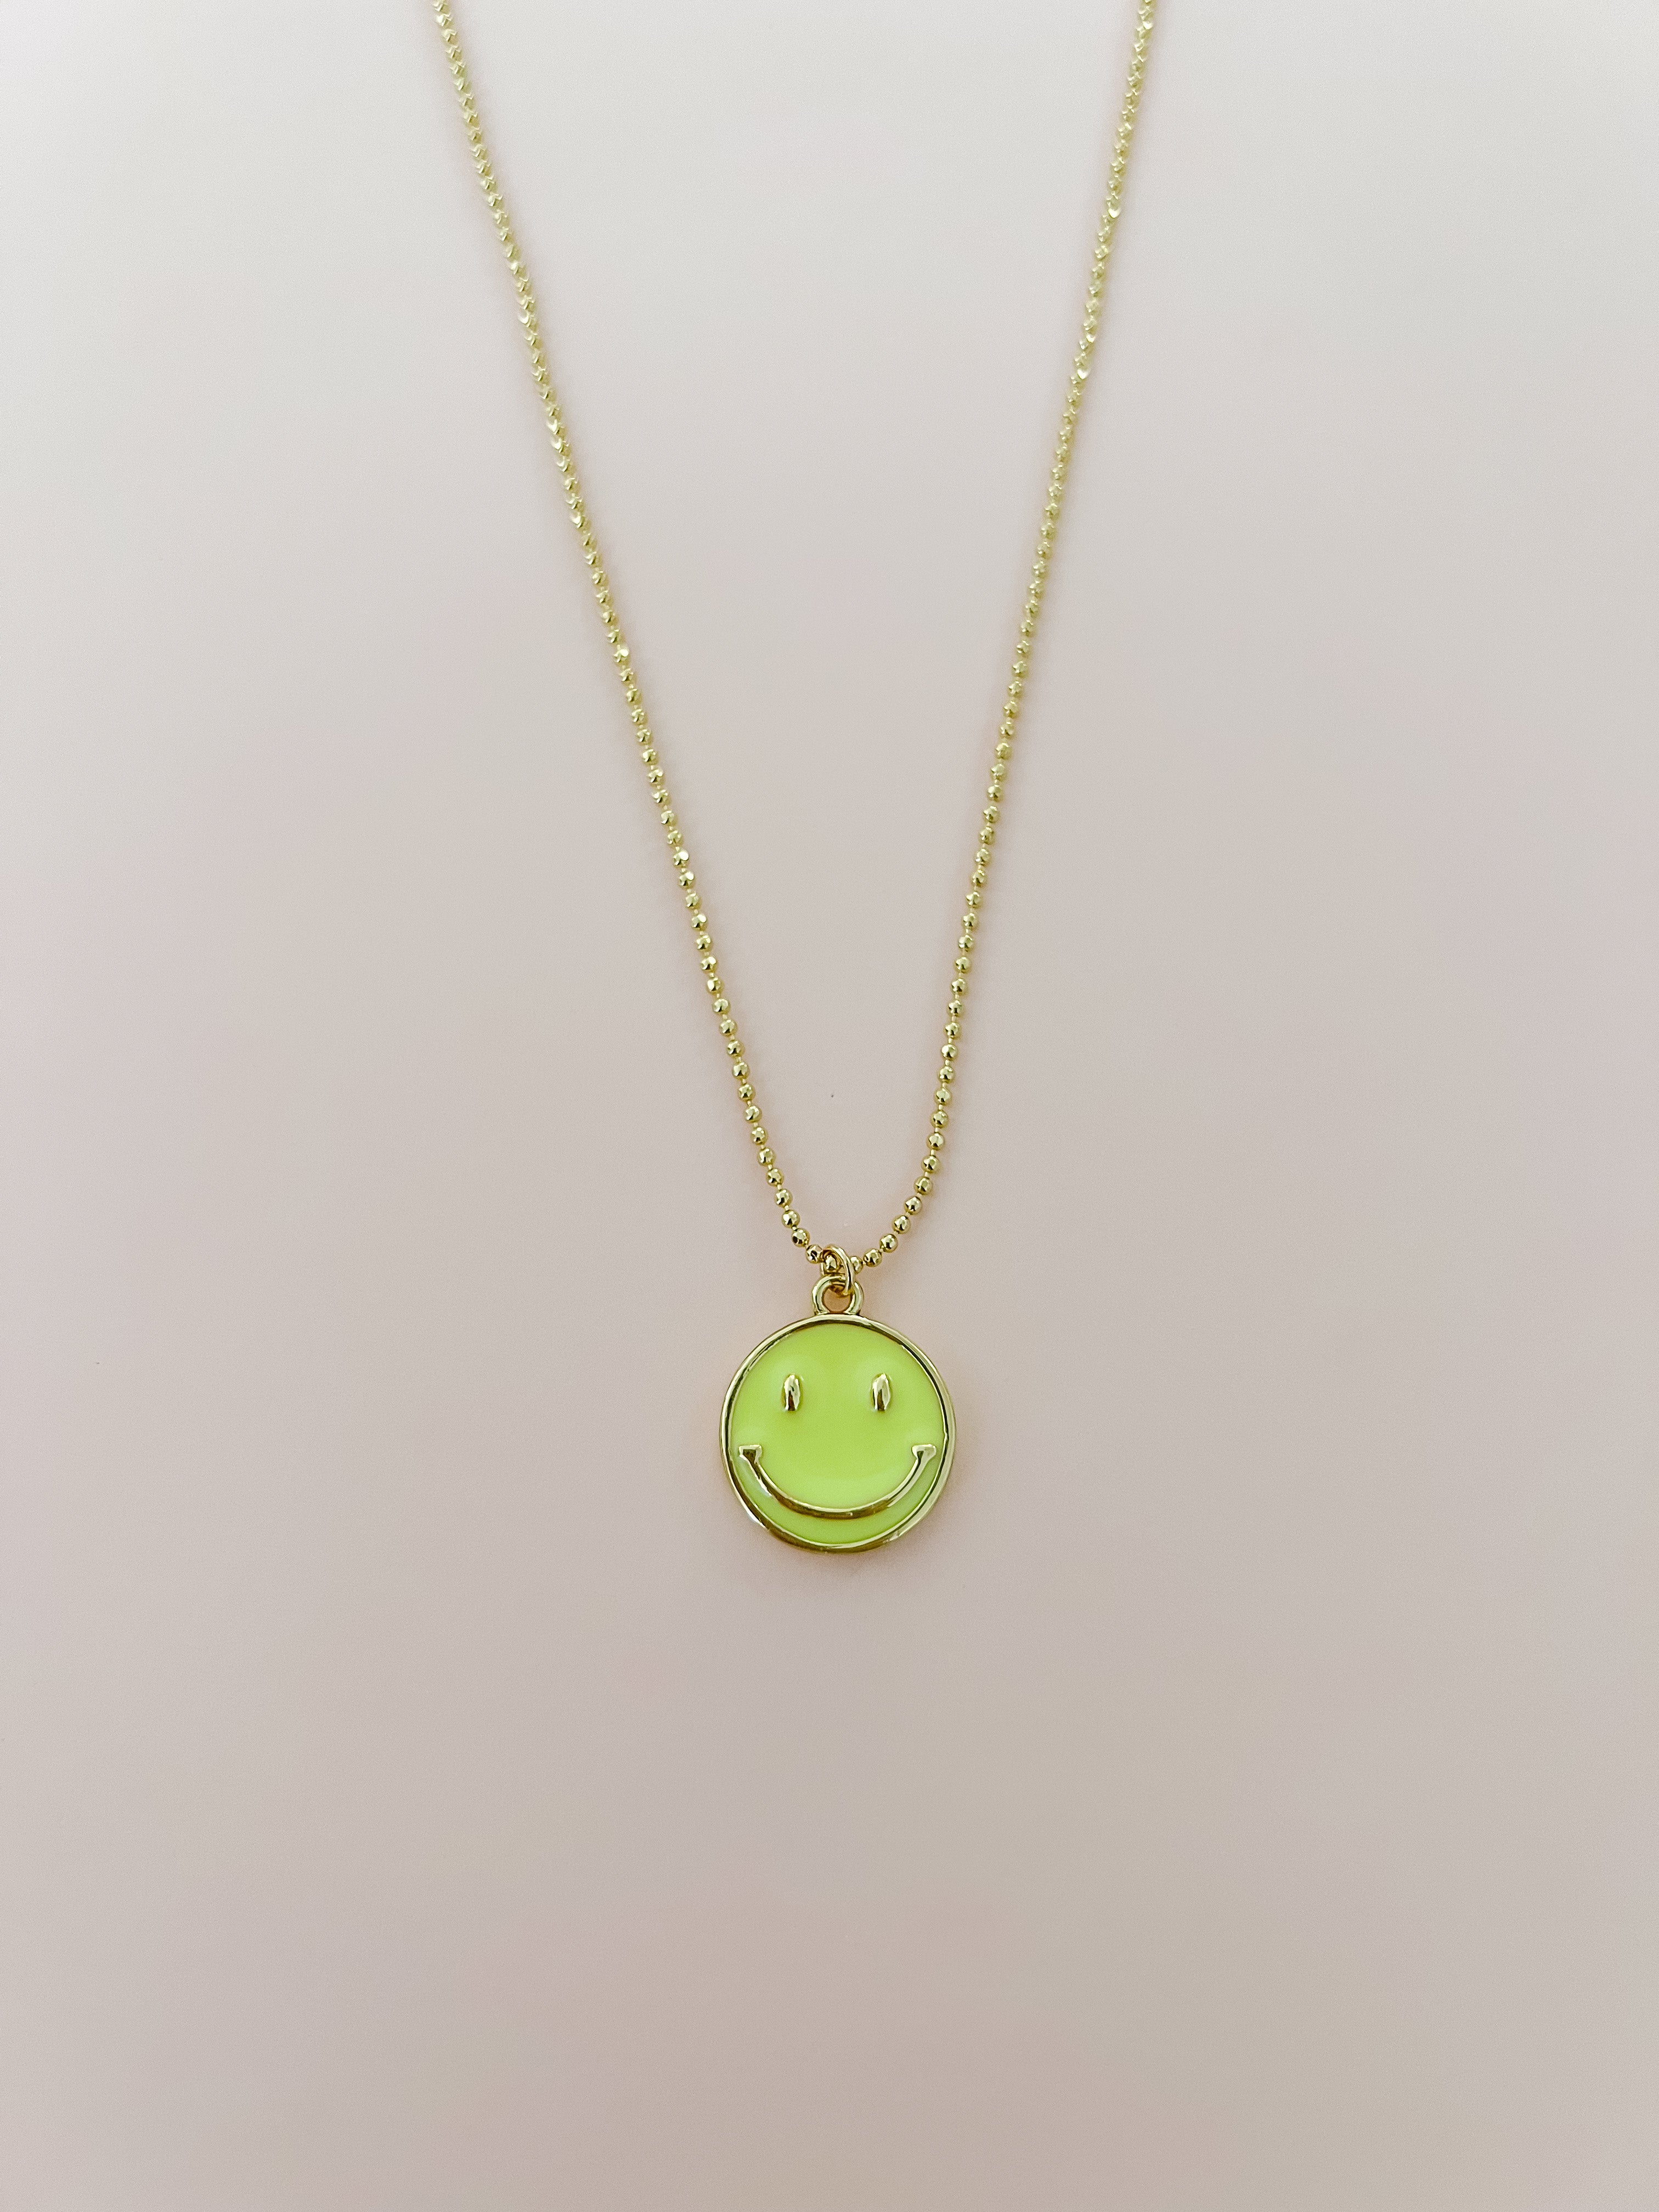 Smiley Face Necklace, Gold Smiley Necklace, Silver Smiley Necklace - Etsy  India